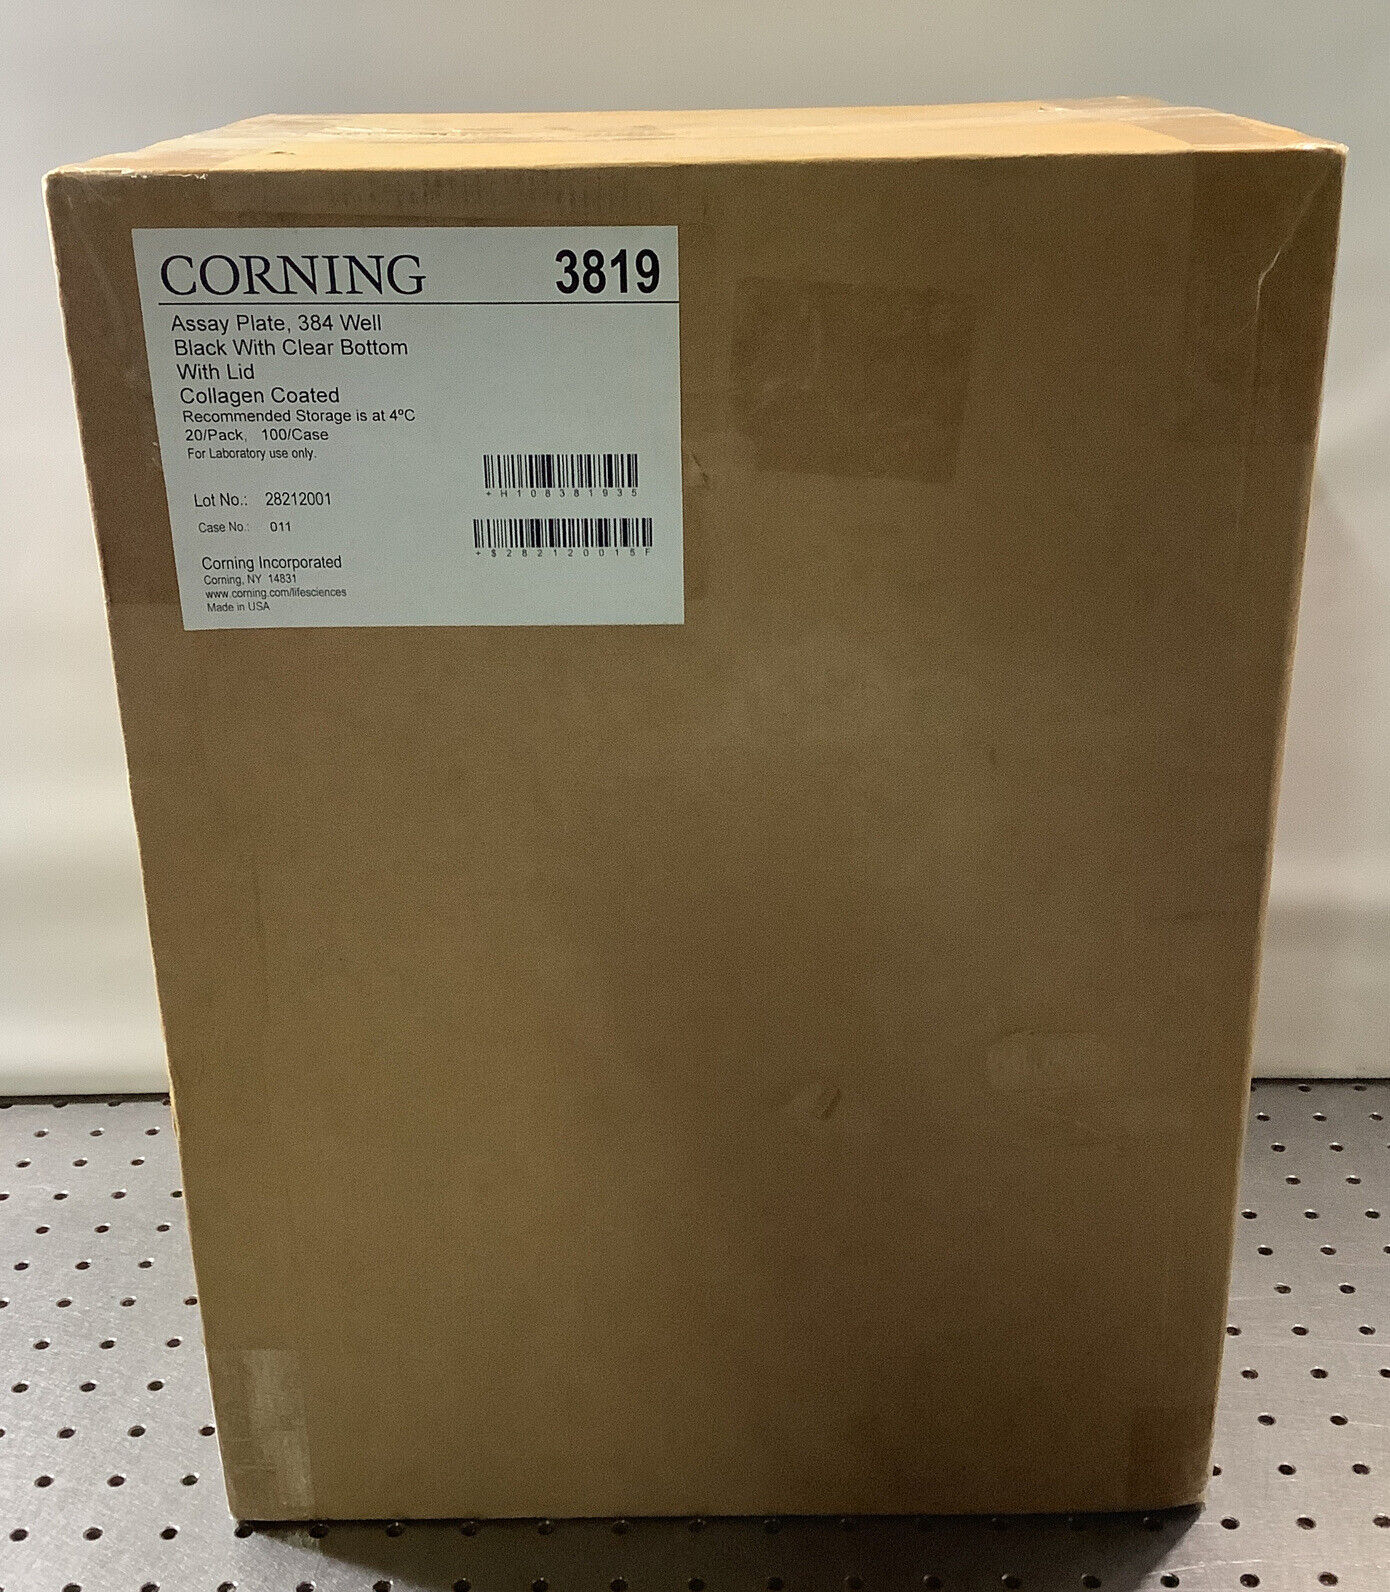 Corning 384 Well Black/Clear Bottom w/ Lid Collagen-Coated Microplate 3819